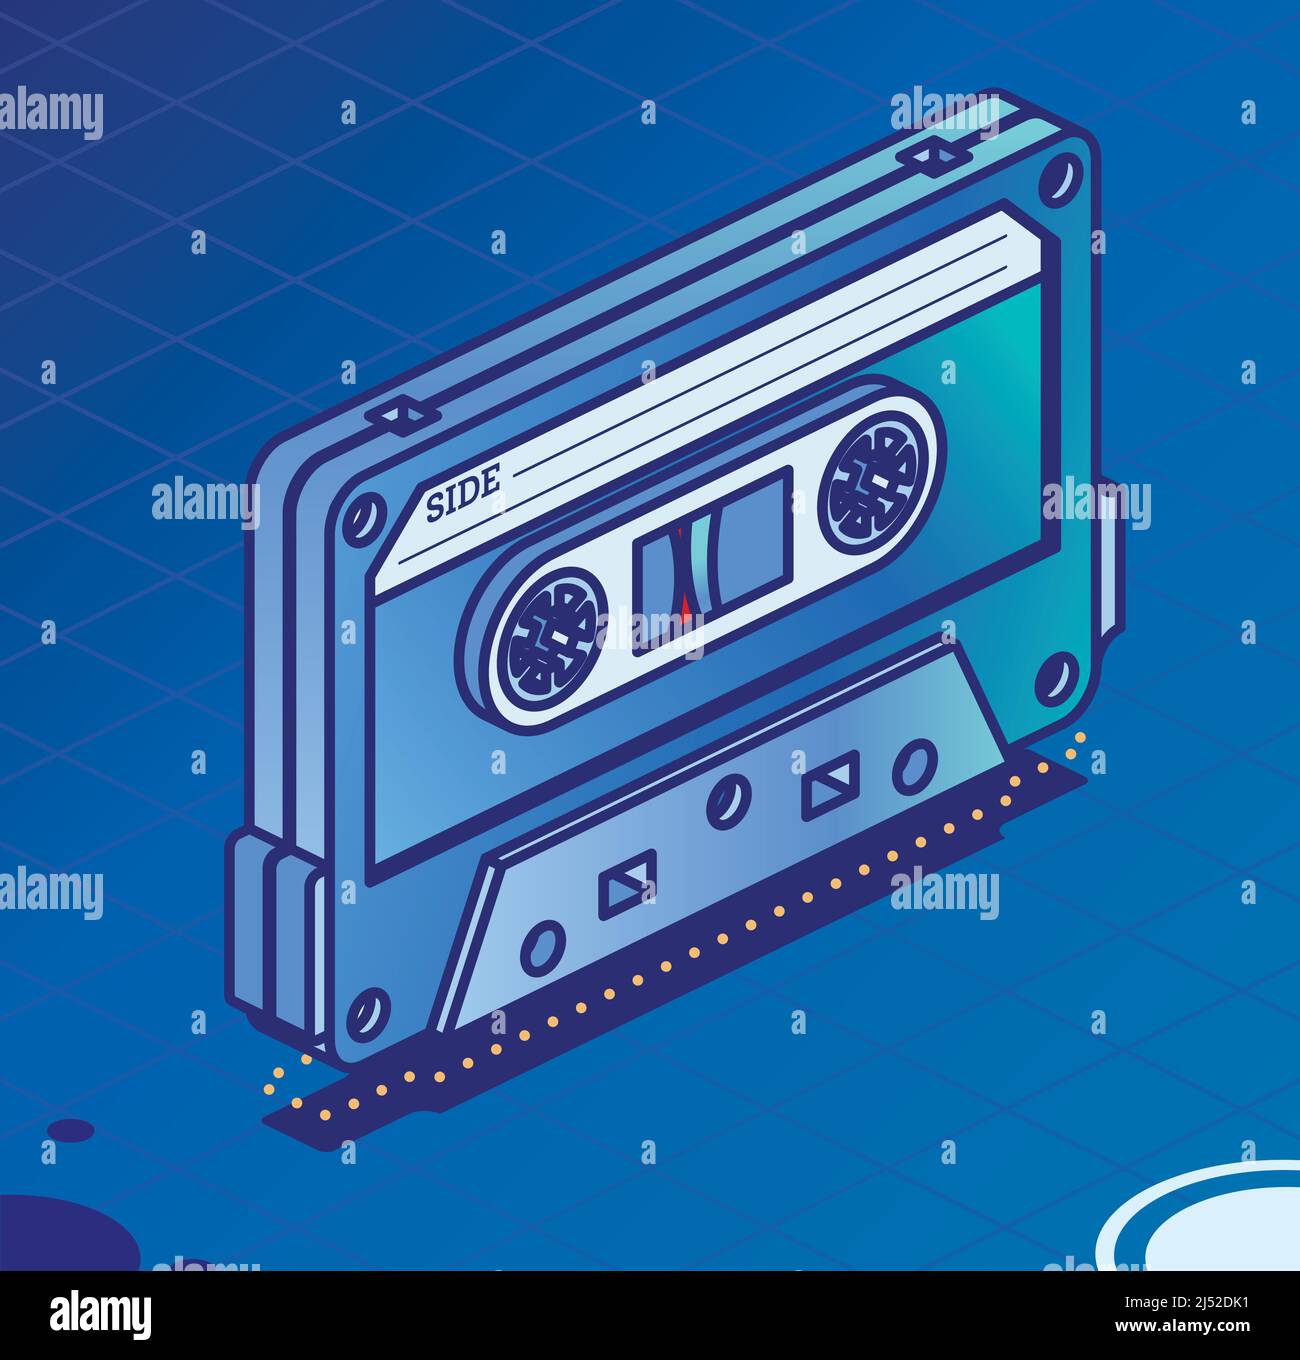 Retro Audio Cassette Tape. Isometric Outline Music Concept. Retro Device from 80s and 90s on Blue. Vector Illustration. Stock Vector